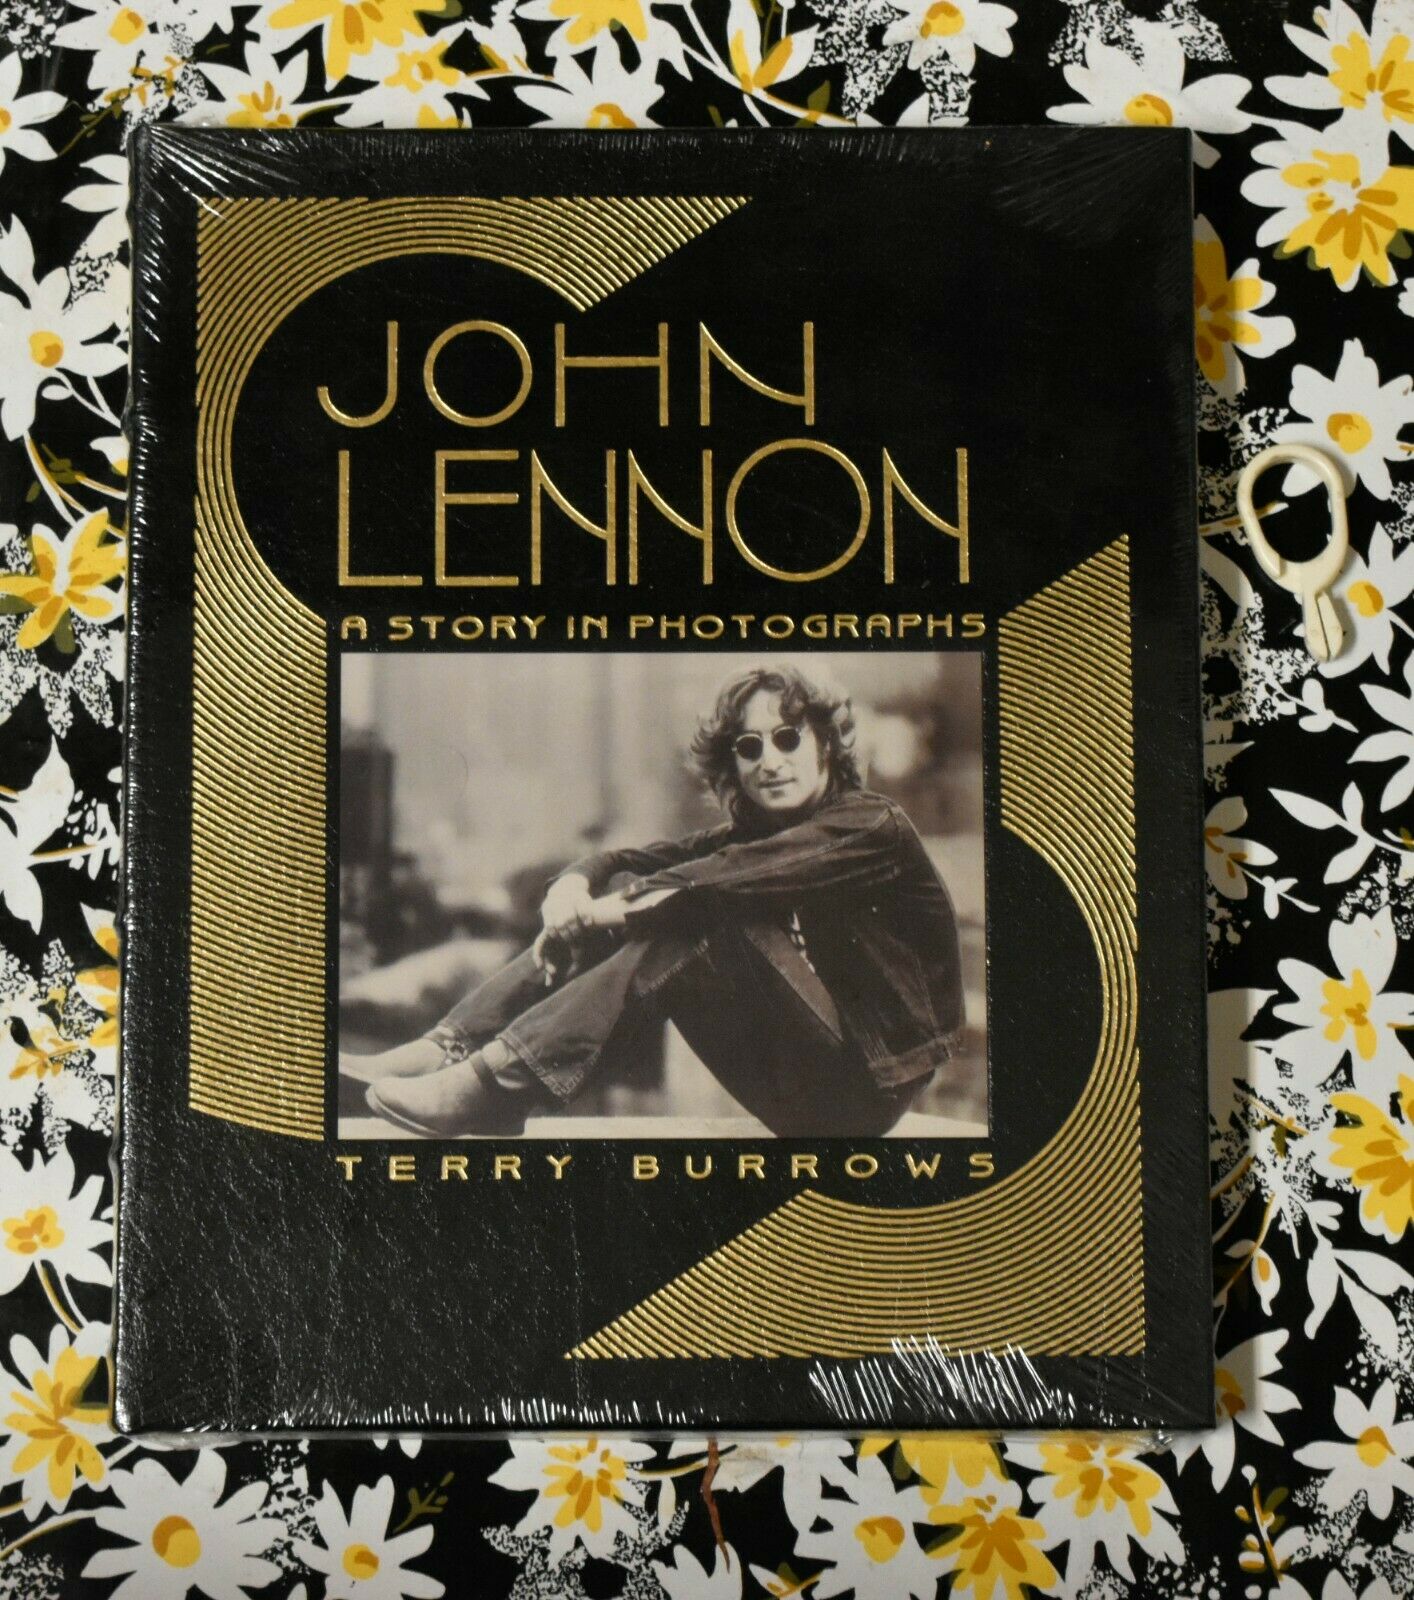 John Lennon A Story In Photographs Terry Burrows Hb Leather Bound Book Sealed